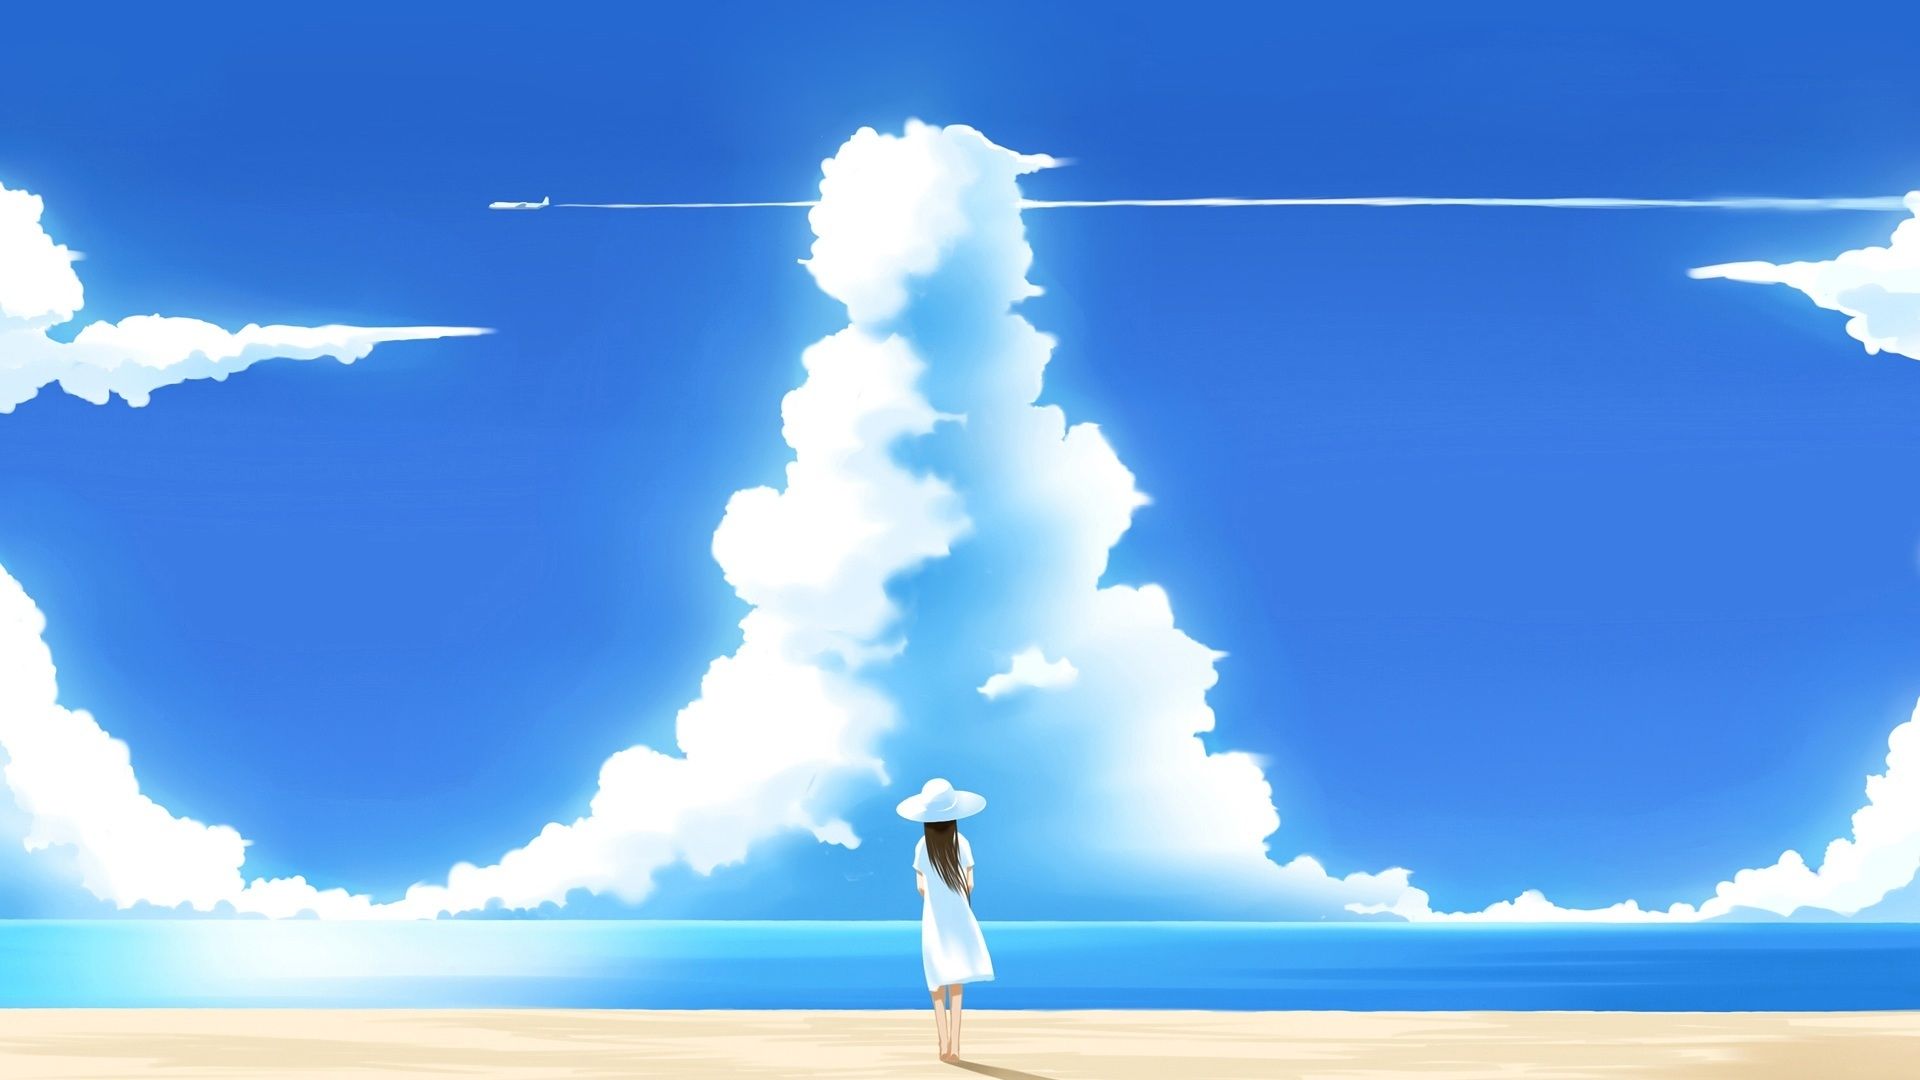 Details more than 73 anime beach background best - awesomeenglish.edu.vn